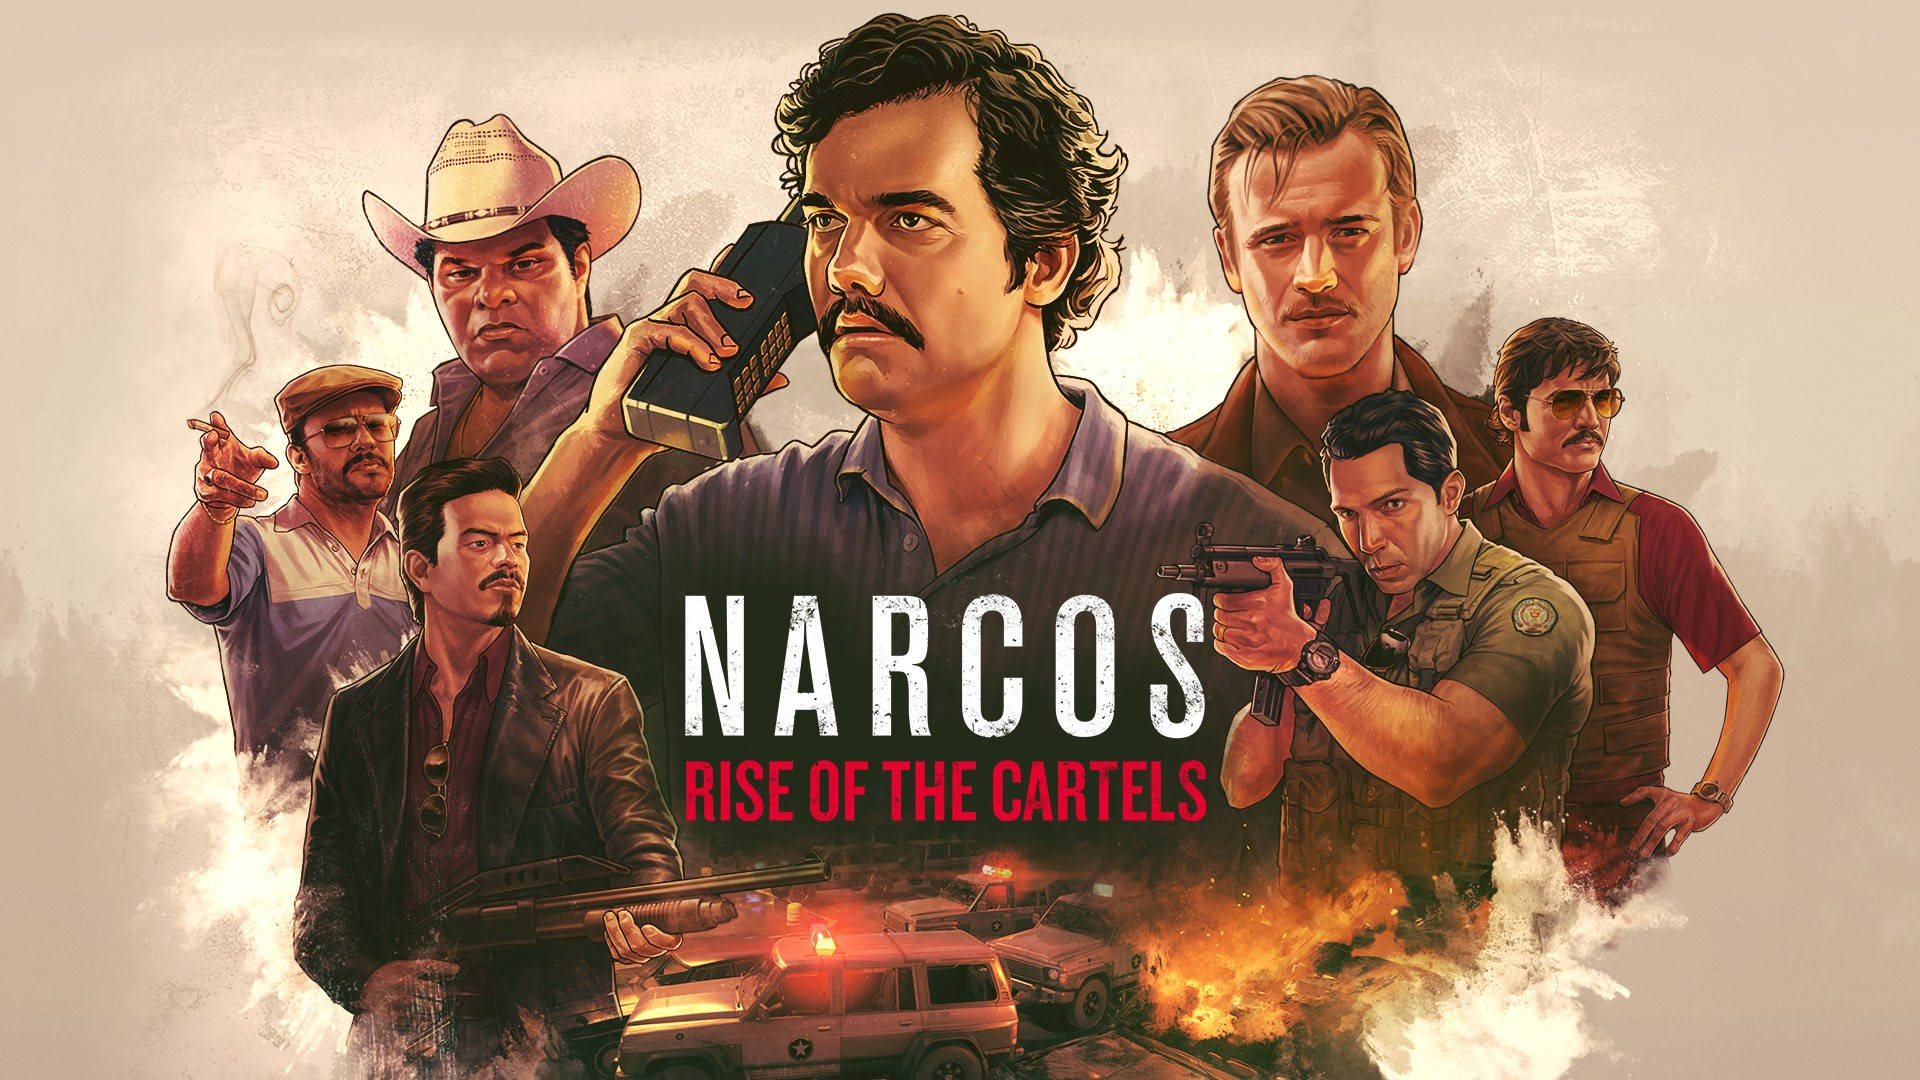 Narcos Background Wallpaper